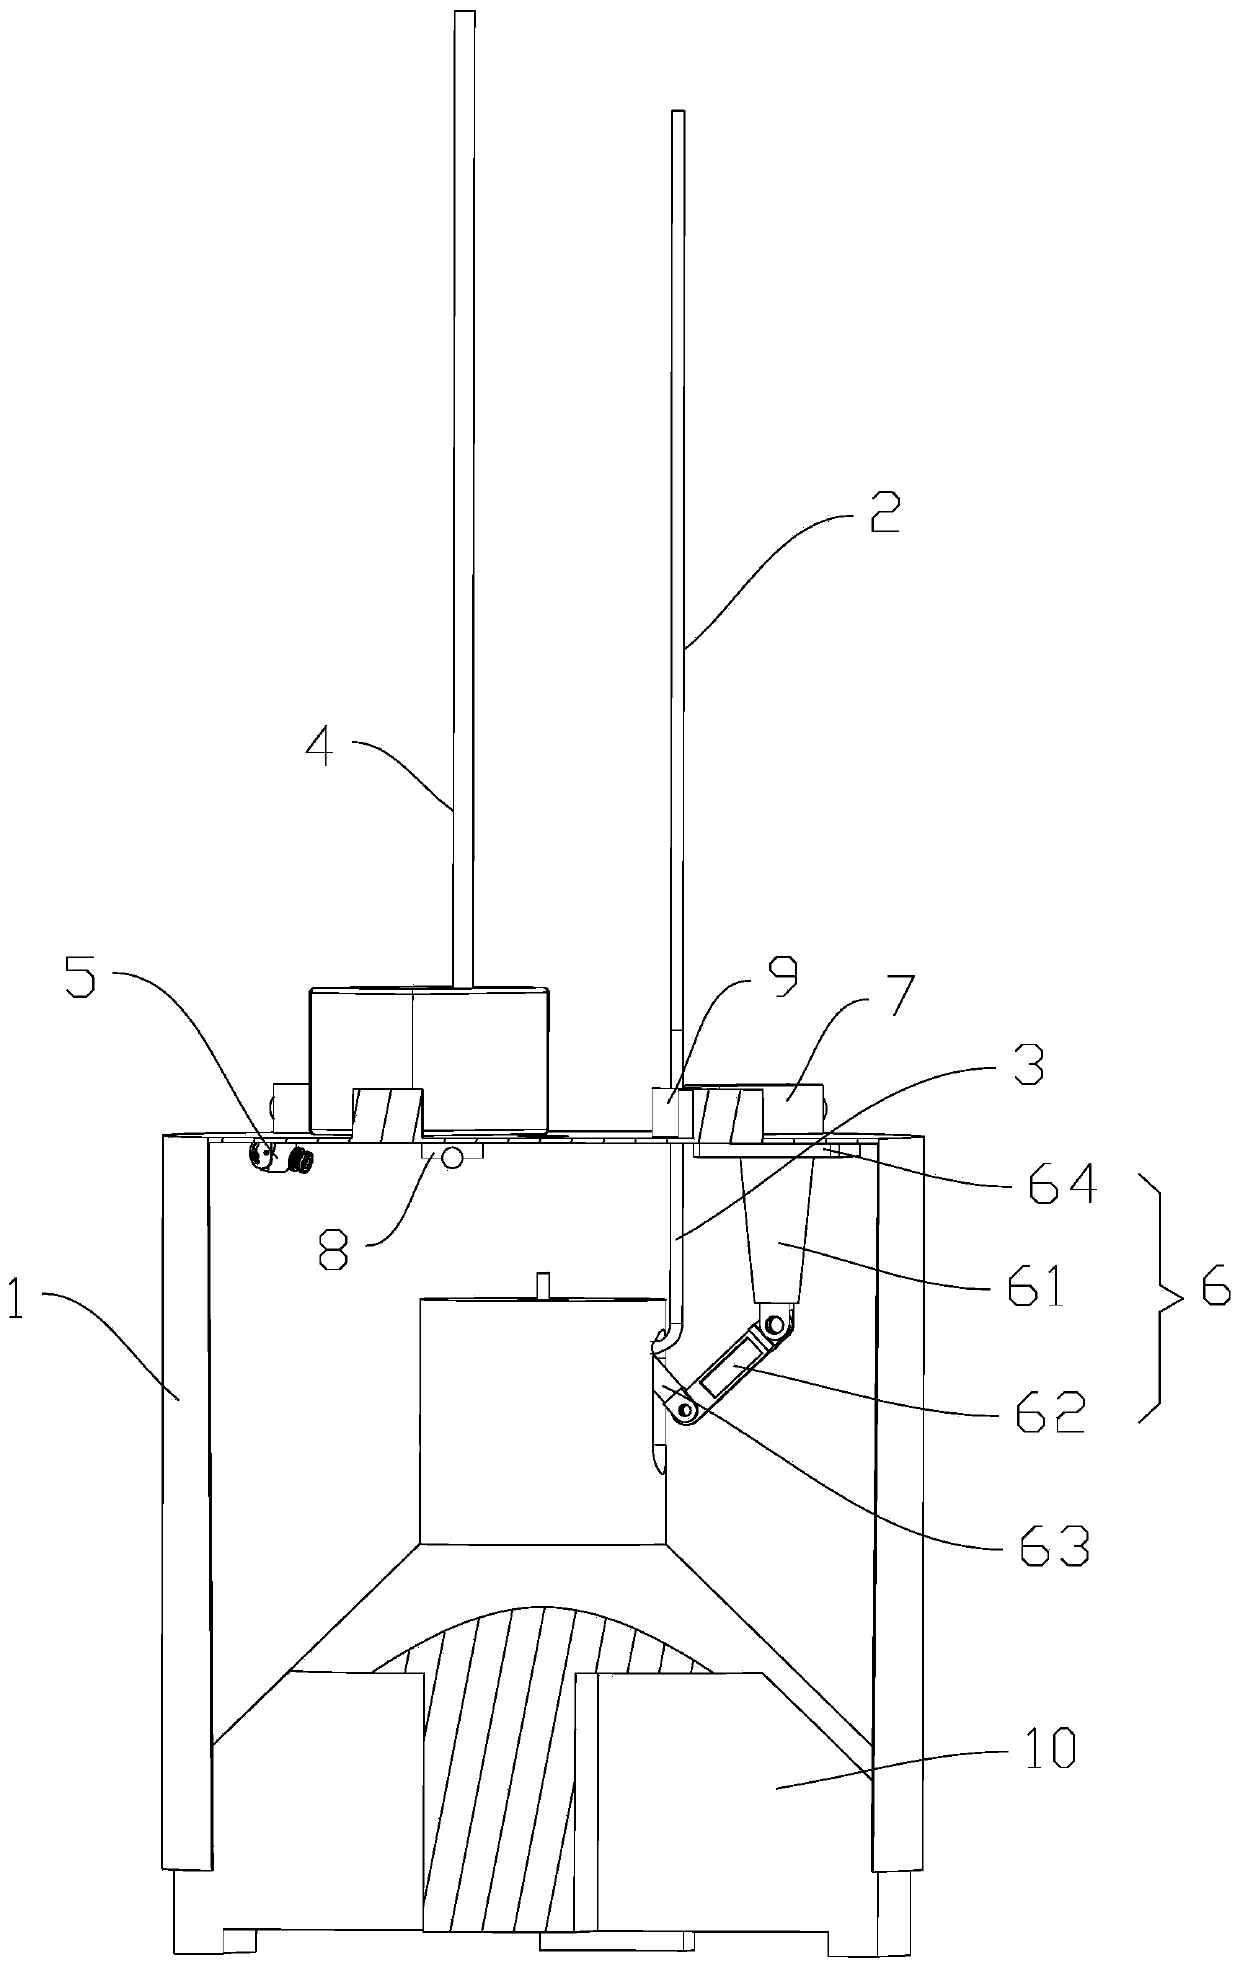 Drill bit fishing device and method